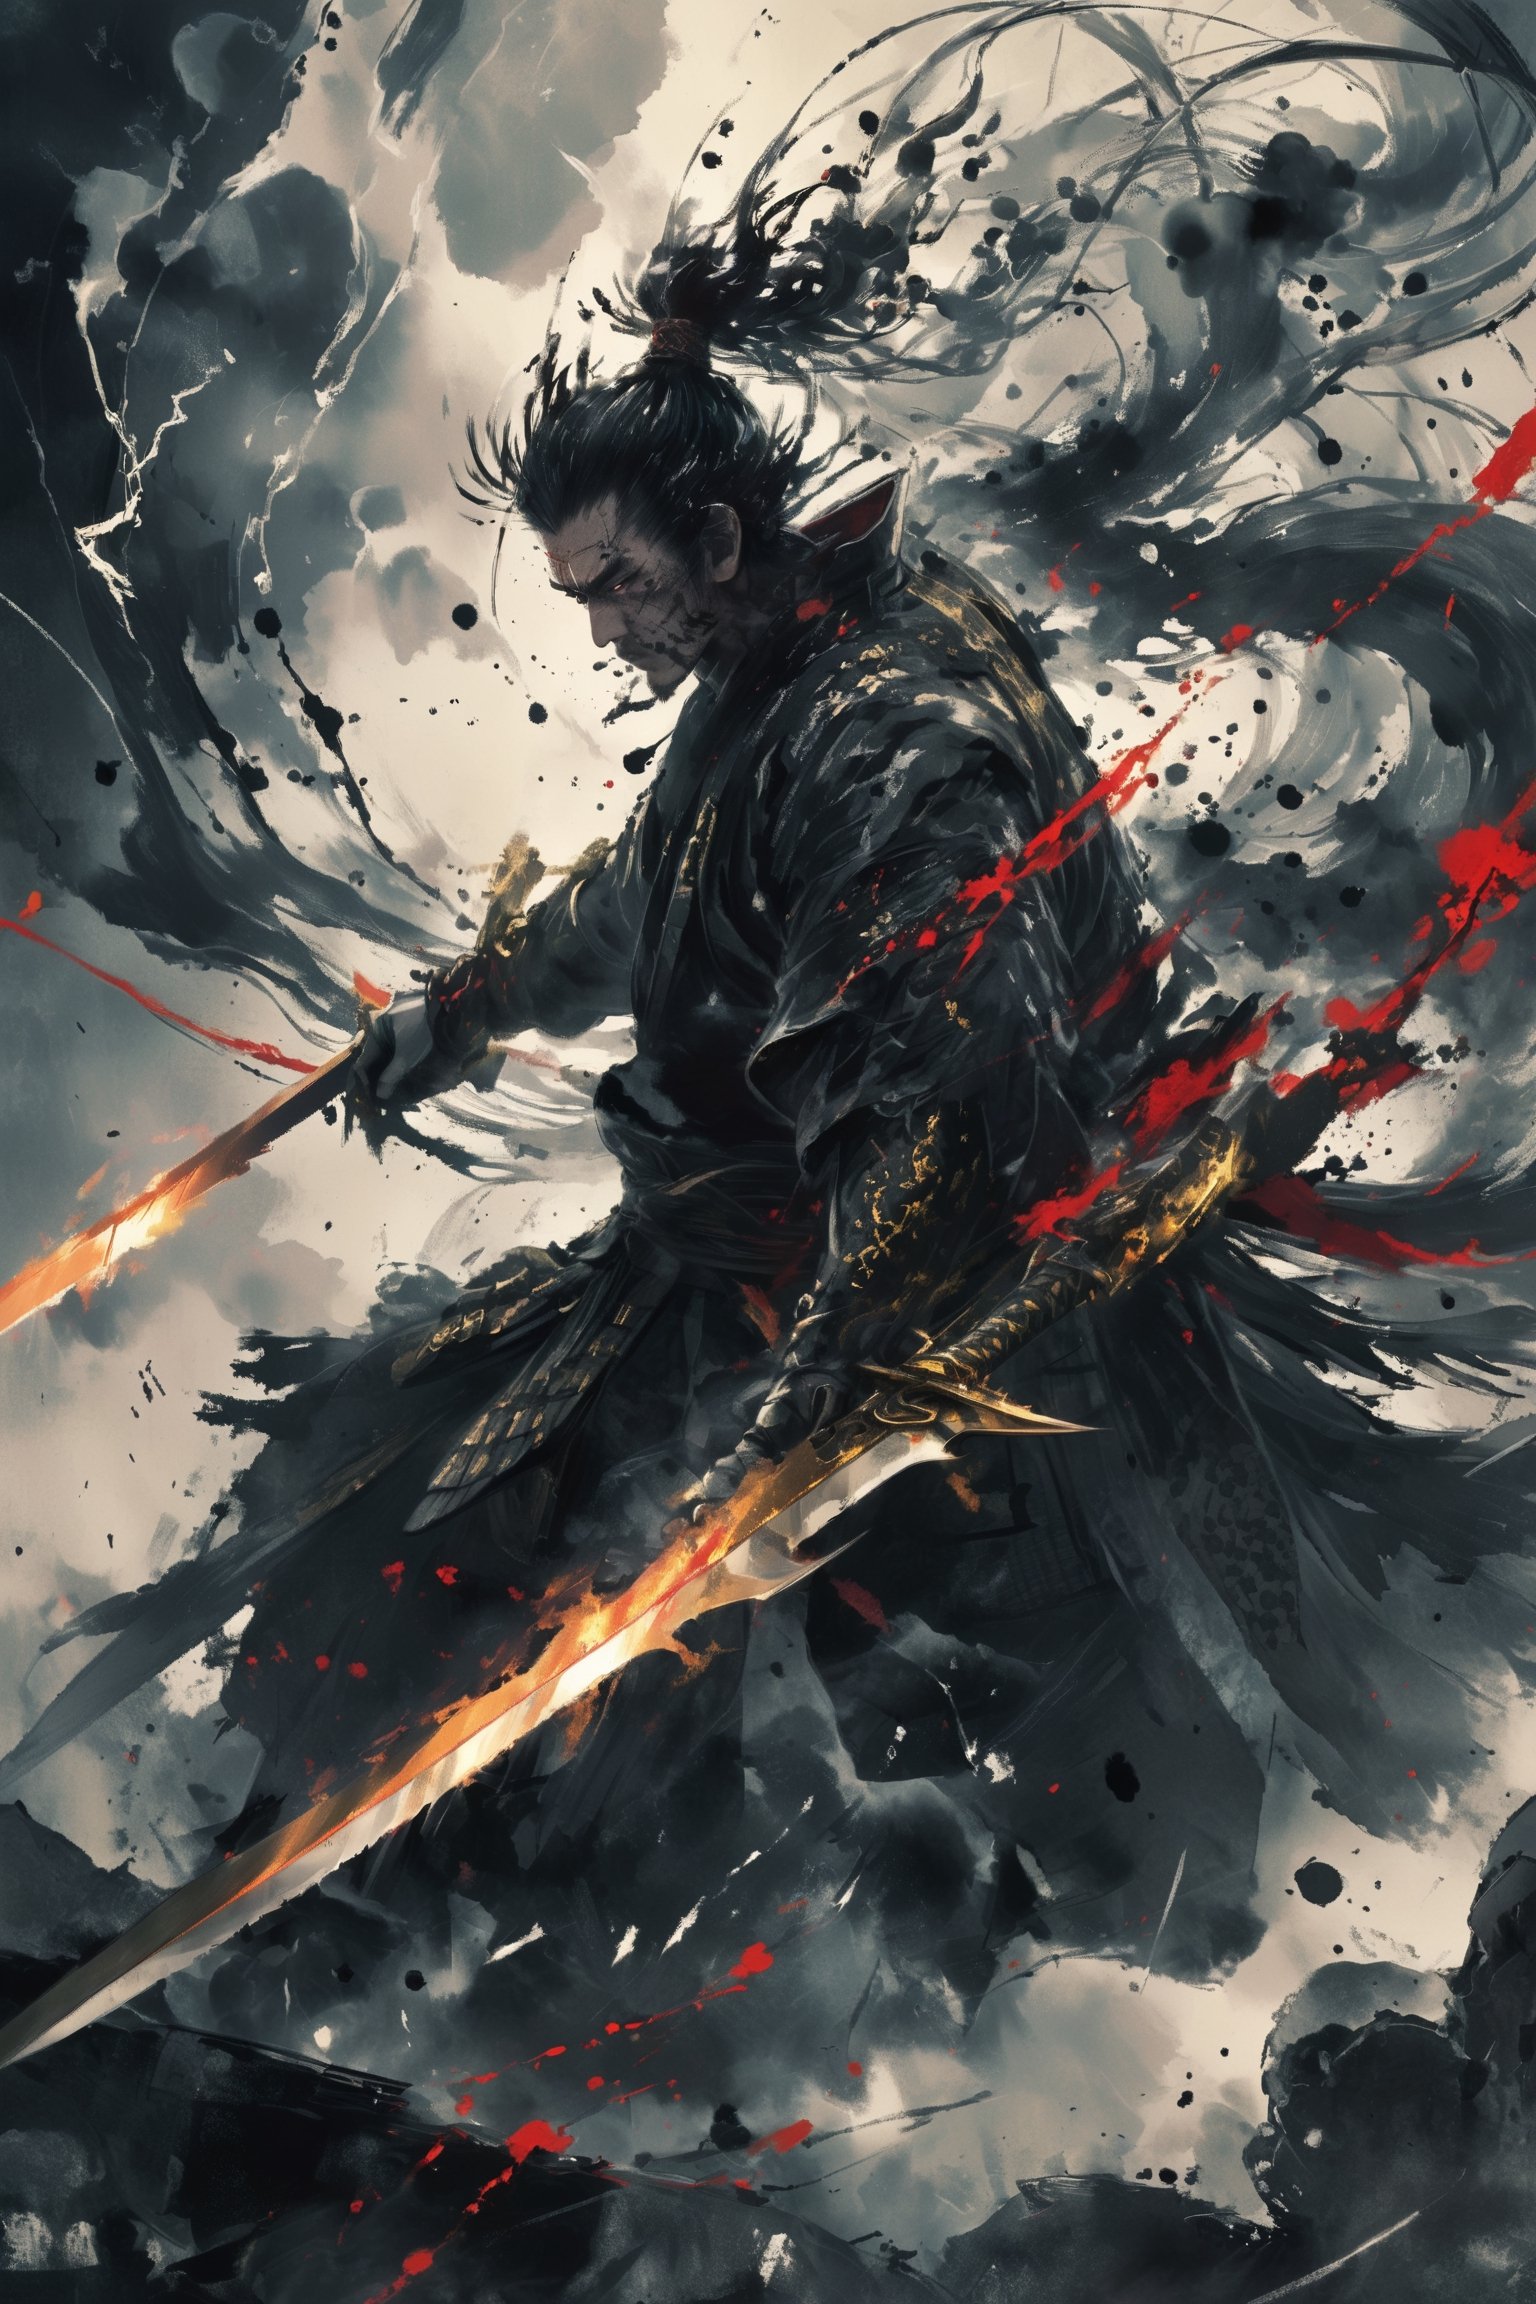 Samurai,moment when a swiftly wielded sword cleaves through an enemy with lightning speed, slicing them in half in a single fluid motion. Envision the sharp blade glinting in the sunlight as it arcs through the air with deadly precision, ,kabuki,ink